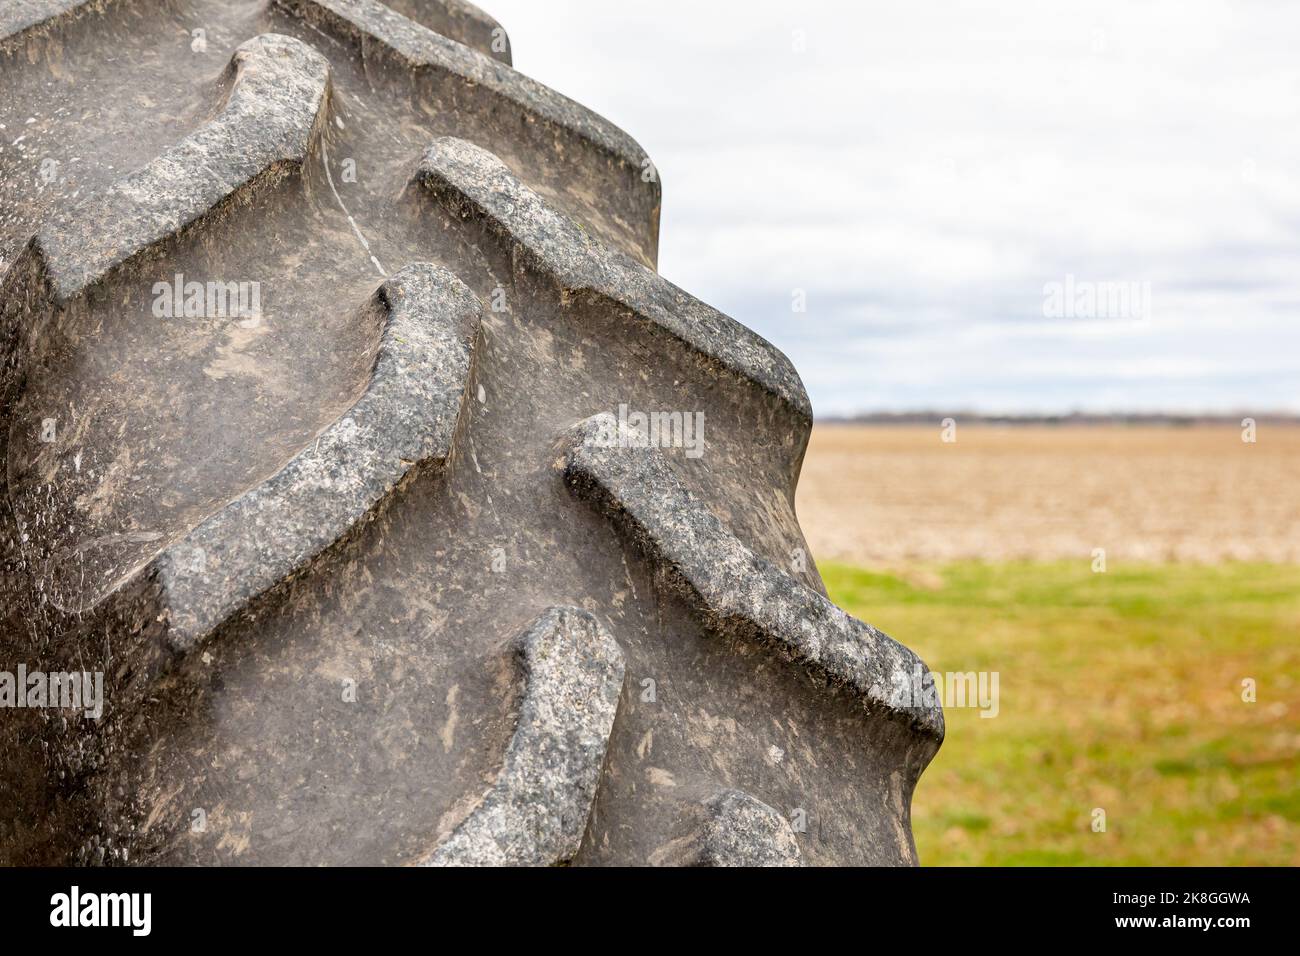 Closeup of farm tractor tire. Tread wear, farming and agriculture equipment maintenance concept. Stock Photo